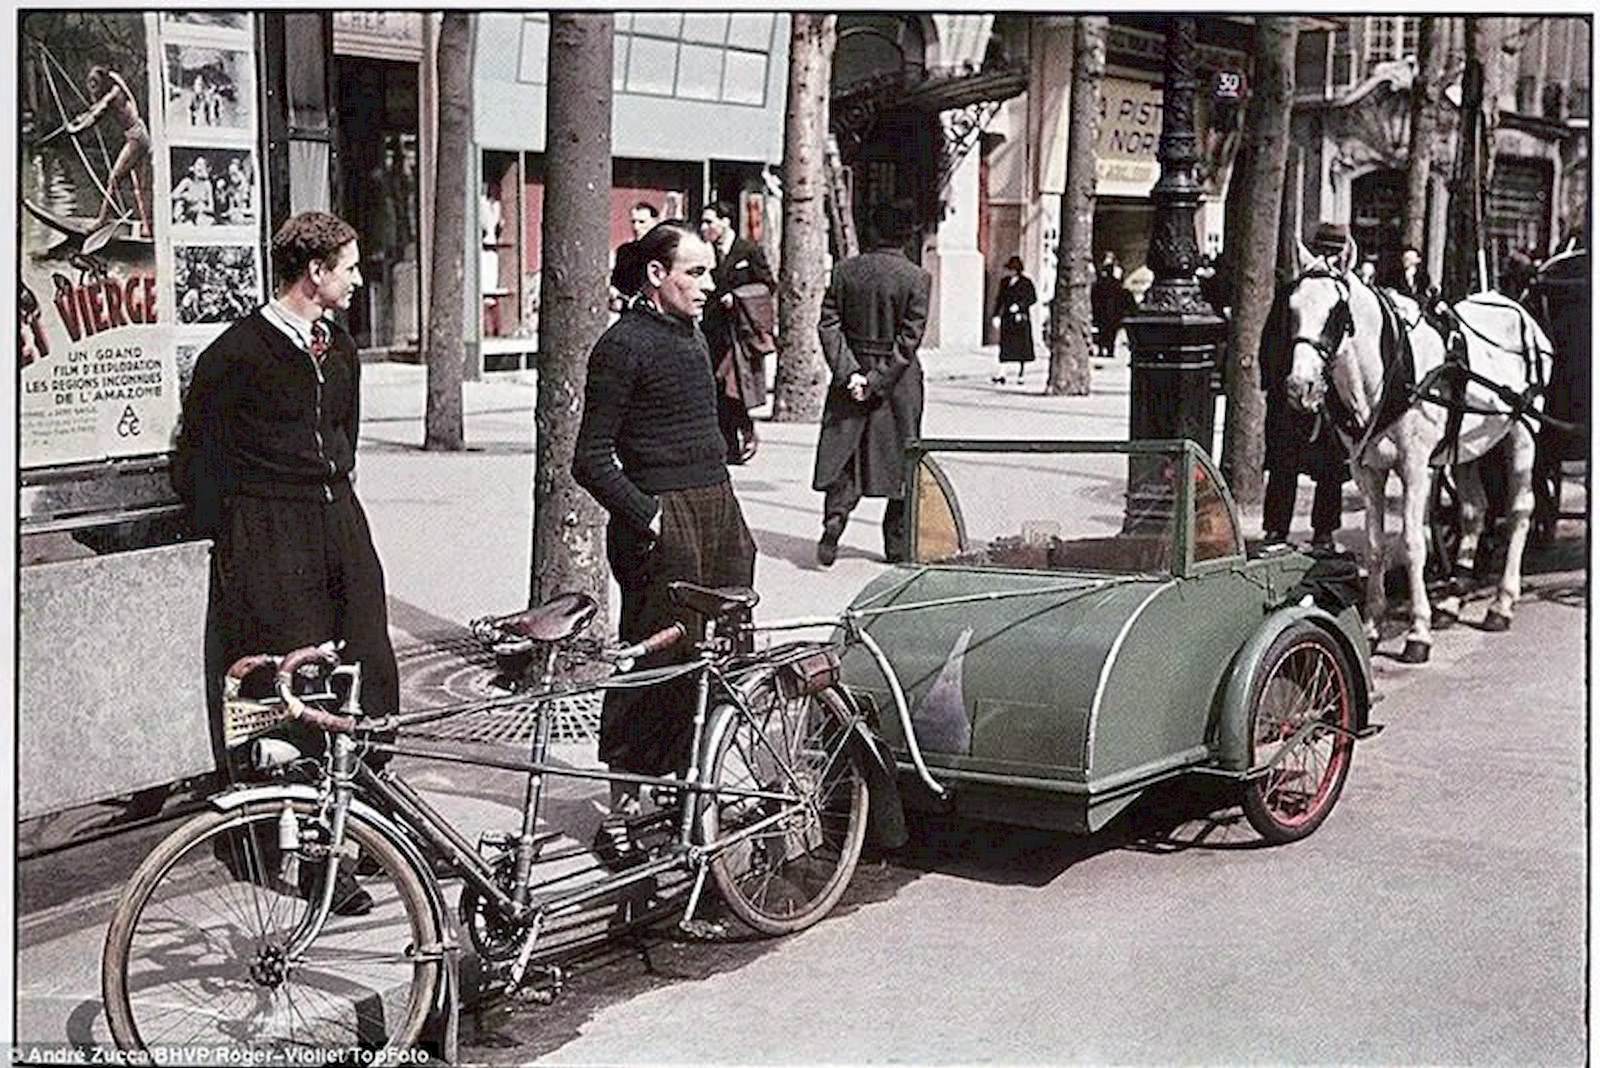 Two fashionably dressed young men stand by a tandem bicycle towing a carriage of sorts.